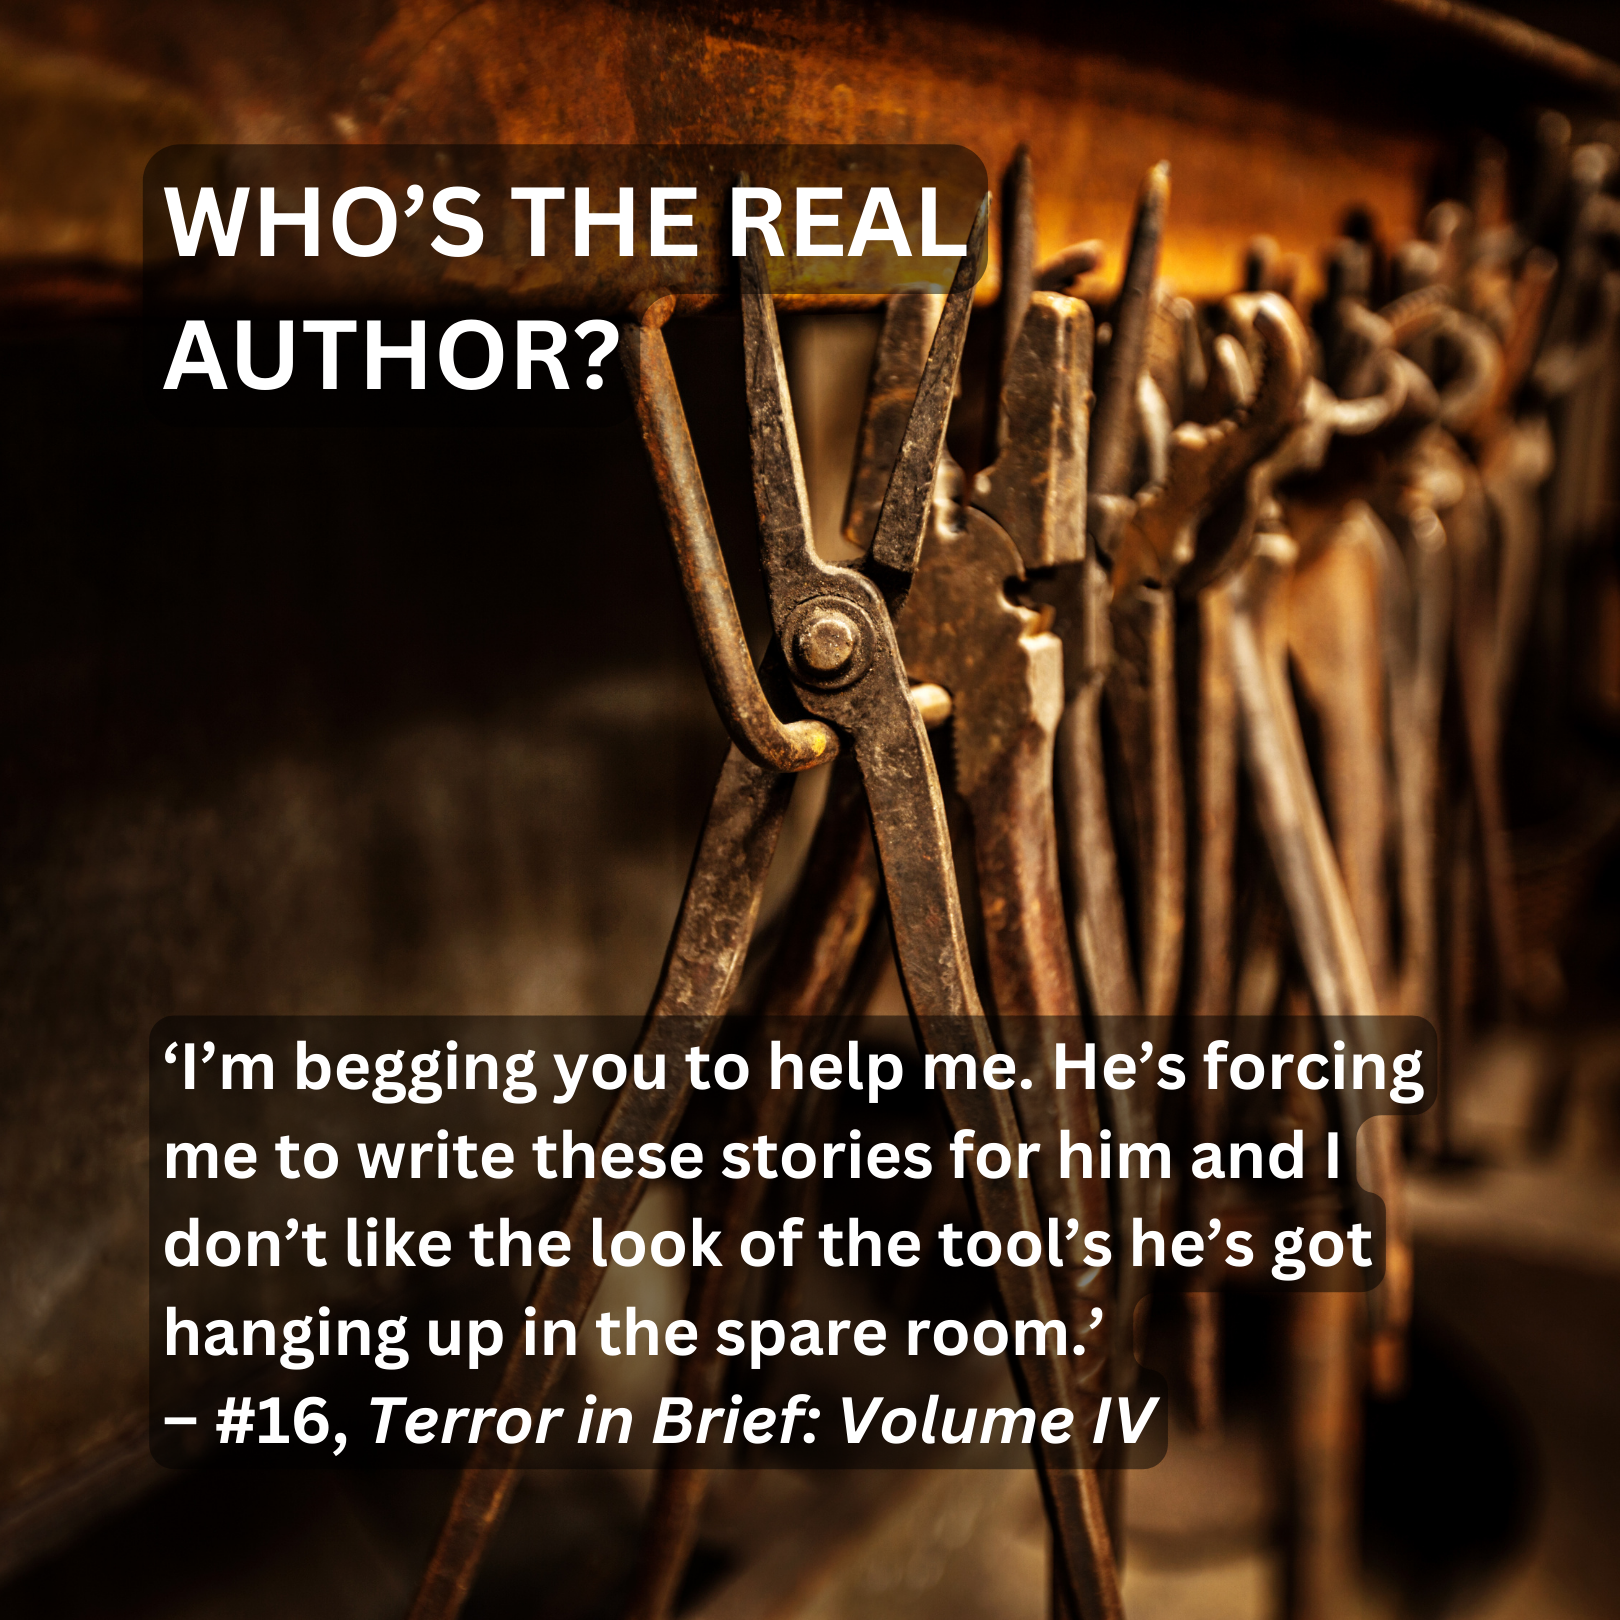 Who's the Real Author? from Terror in Brief: Volume IV